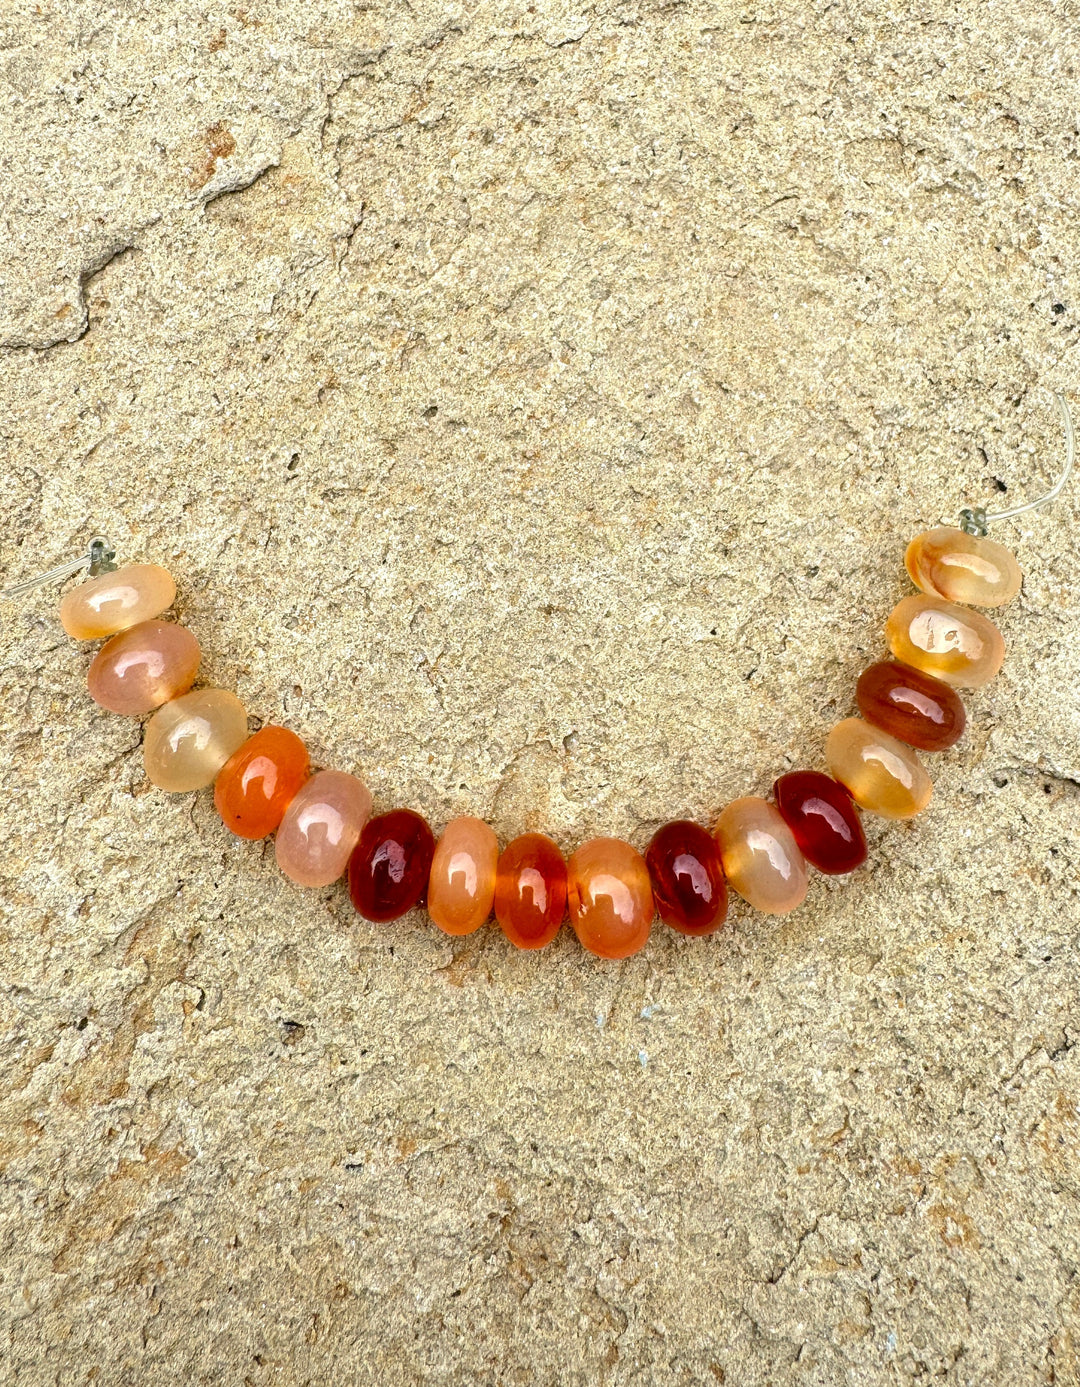 Carnelian 9mm rondelle beads set of 16 beads - Coral